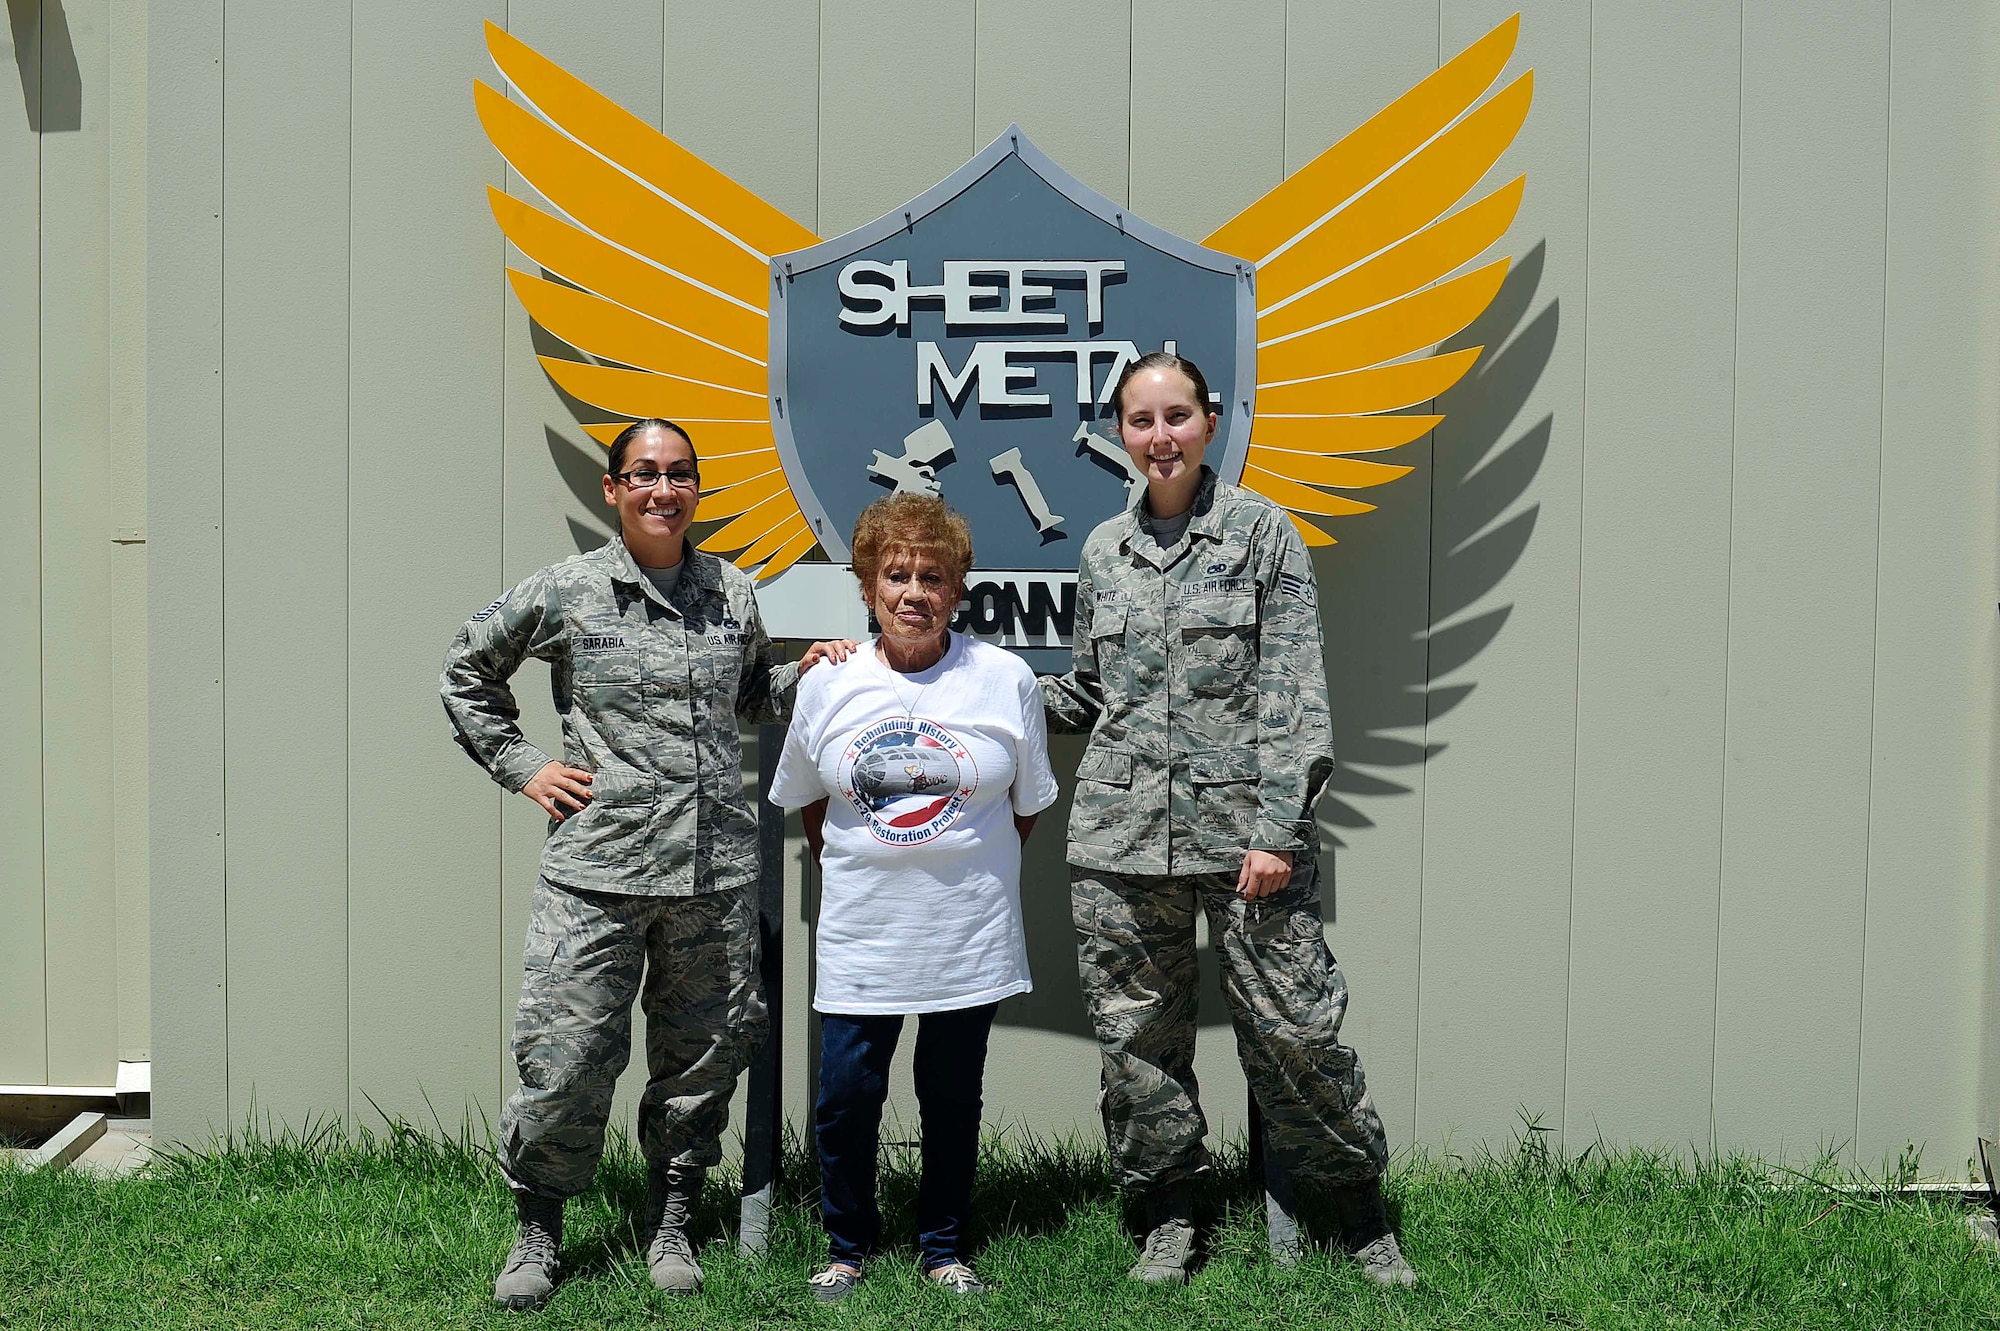 Master Sgt. Elizabeth Sarabia, 931st Maintenance Squadron aircraft structural maintenance section chief, left, and Senior Airman Ciarra White, 22nd Maintenance Squadron ASM journeyman, right, pose with Connie Palacioz, a riveter during World War II, July 20, 2016, at McConnell Air Force Base, Kan. Palacioz recently visited the base sheet metal shop where she received a tour and spoke with Airmen. (U.S. Air Force photo/Airman 1st Class Jenna K. Caldwell)